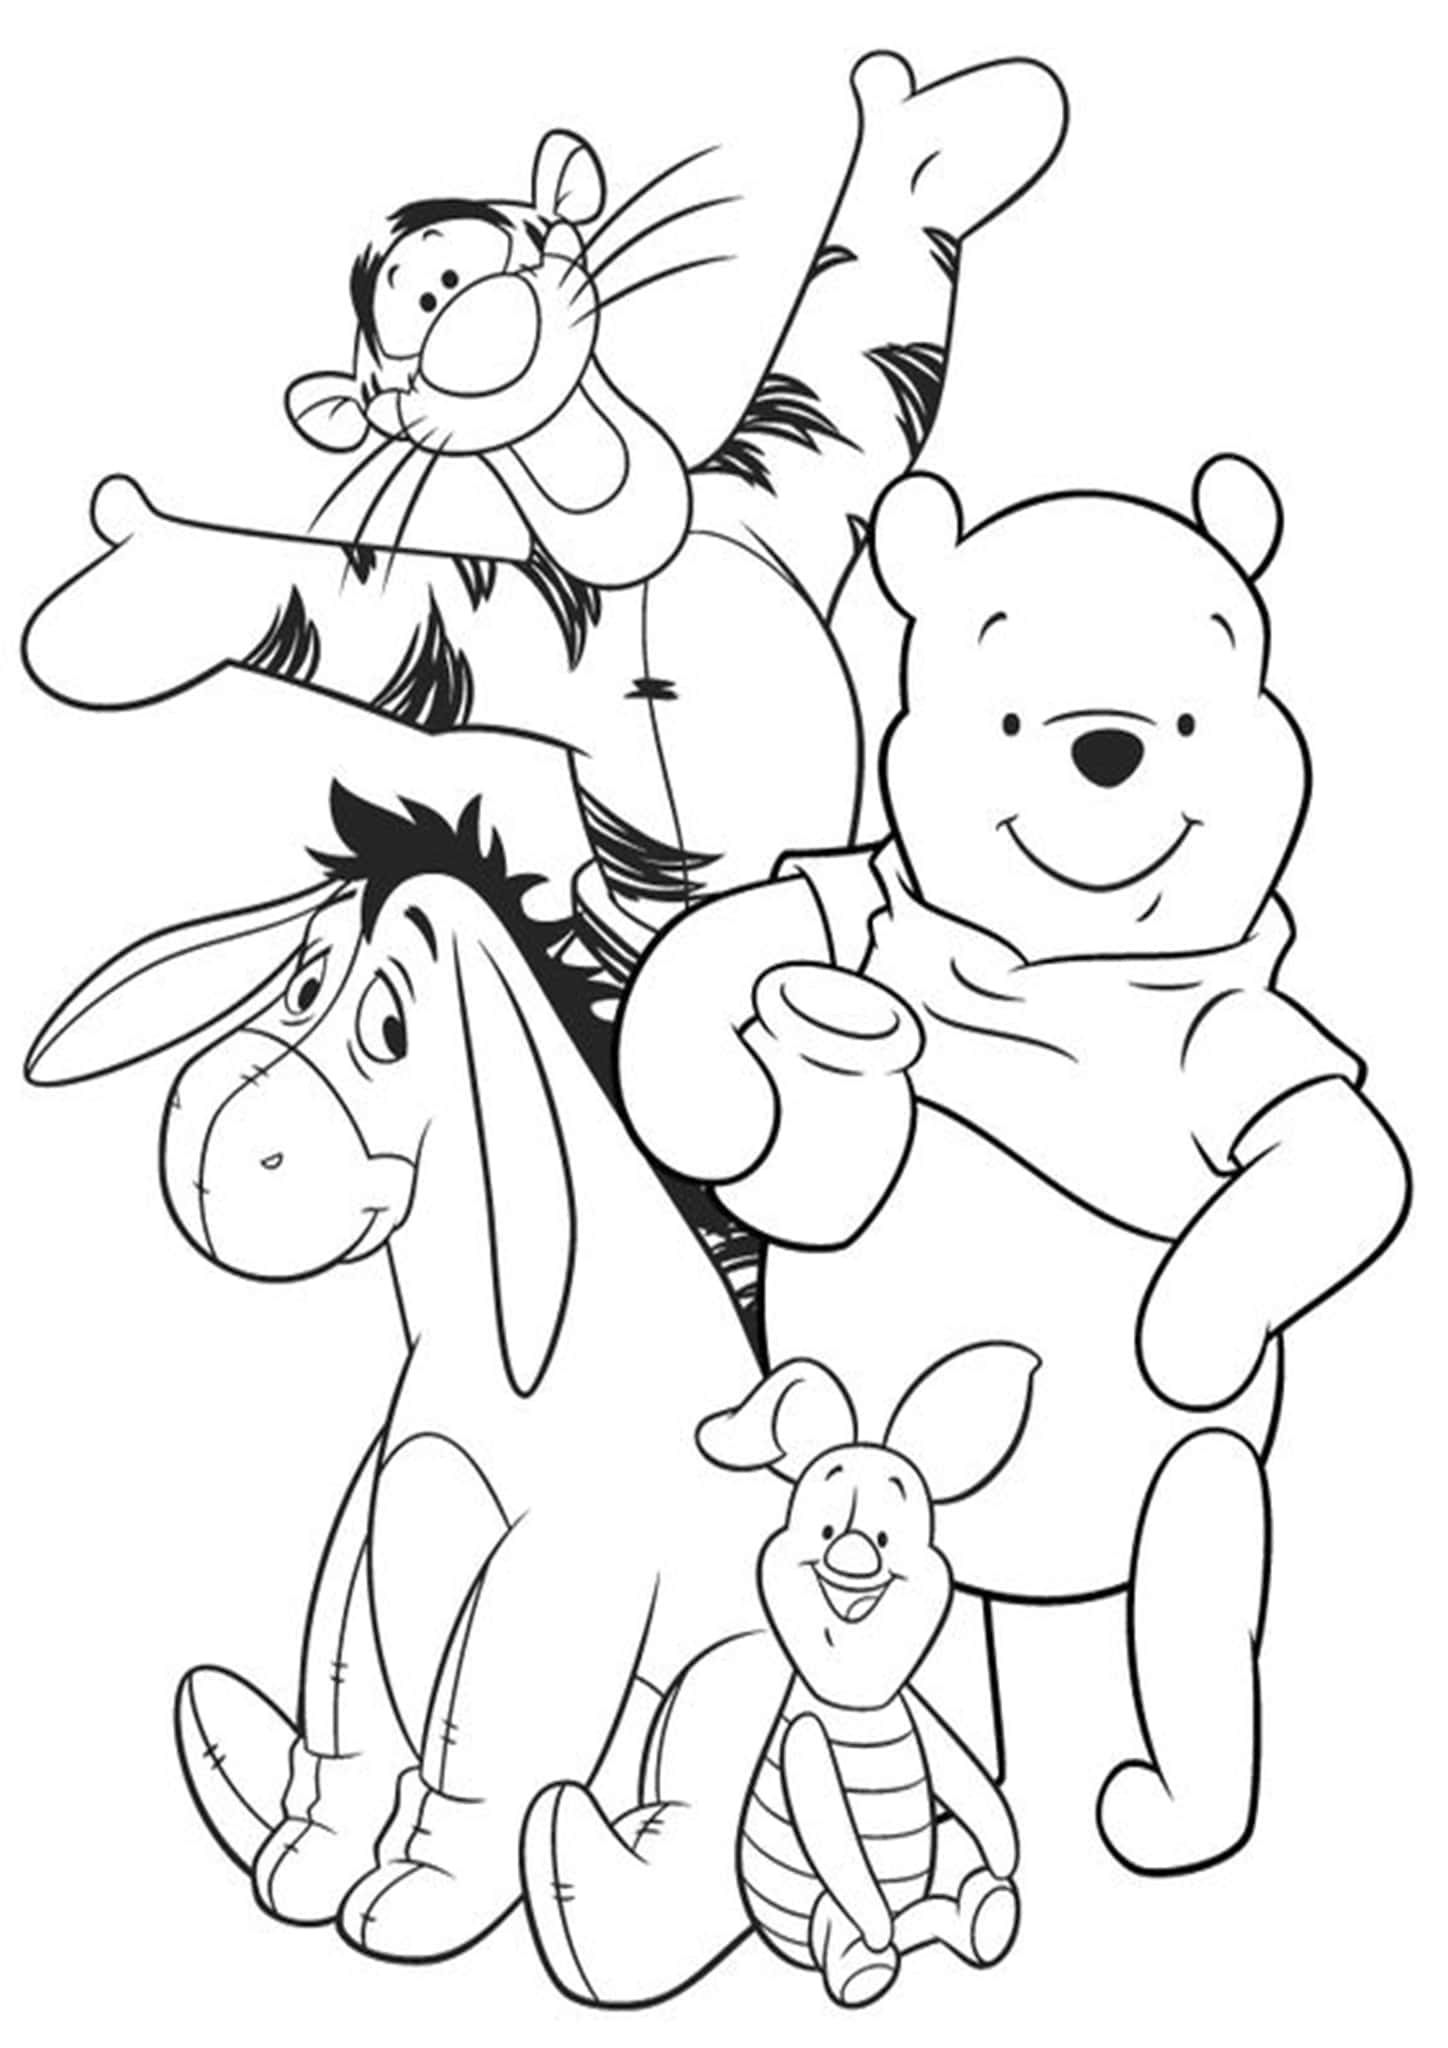 Free easy to print winnie the pooh coloring pages cartoon coloring pages disney coloring pages cute coloring pages